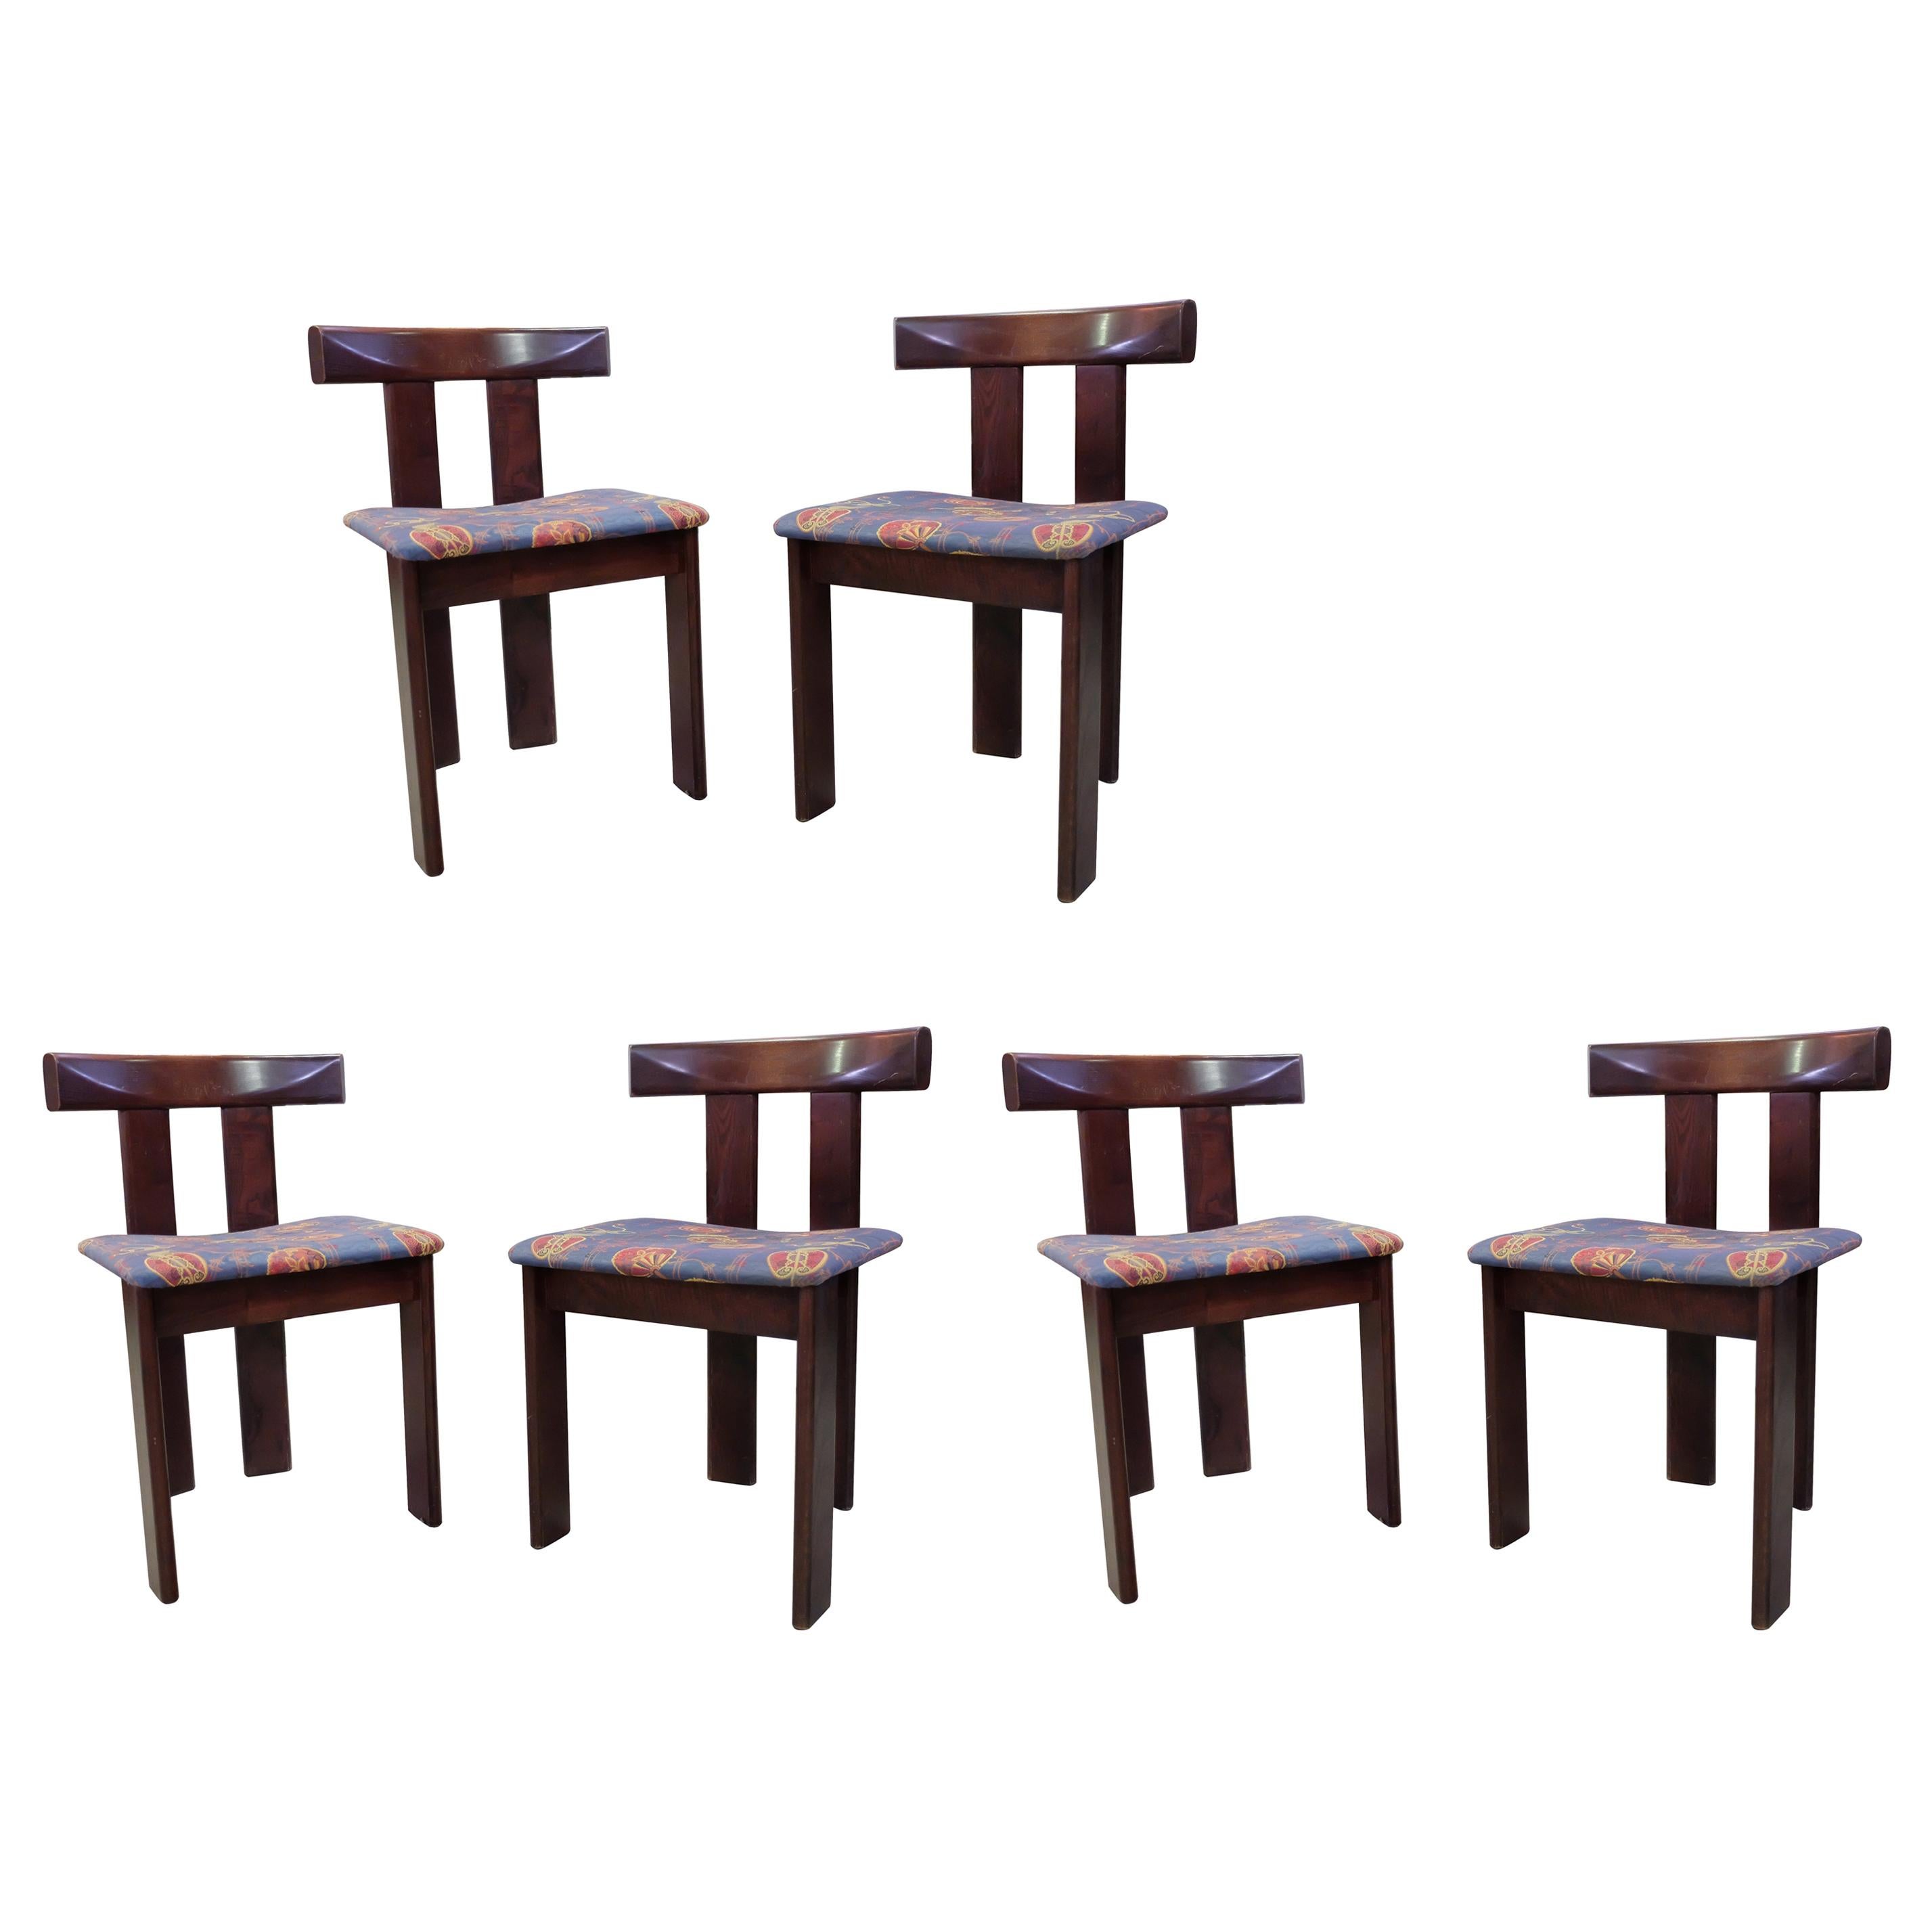 Vico Magistretti Set of Six Wooden Chairs, 1950s